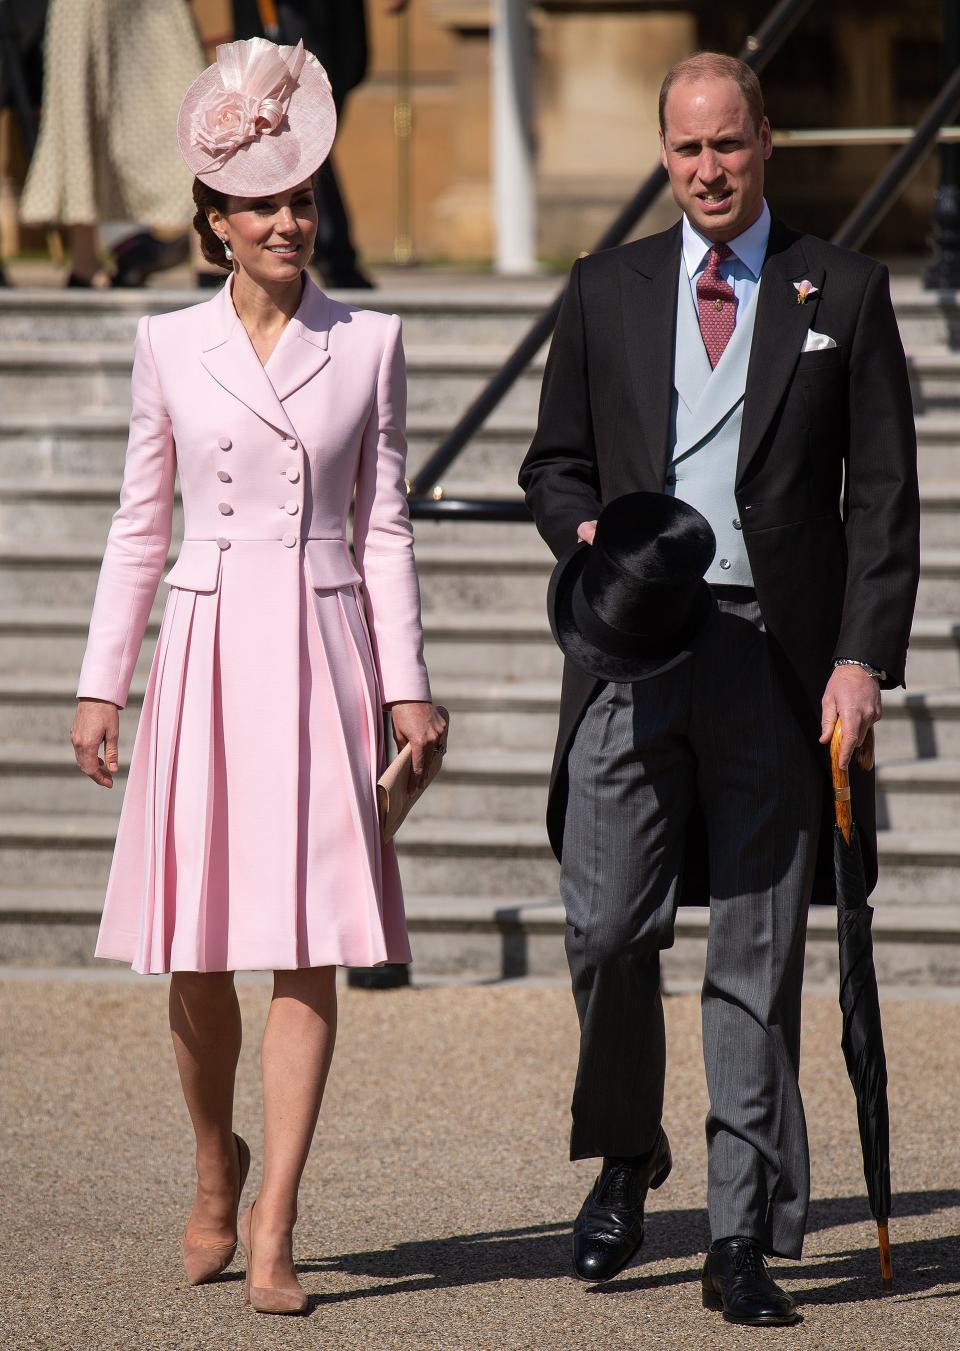 Kate Middleton <a href="https://people.com/royals/kate-middleton-garden-party-buckingham-palace/" rel="nofollow noopener" target="_blank" data-ylk="slk:attended The Queen’s Garden Party at Buckingham Palace;elm:context_link;itc:0;sec:content-canvas" class="link ">attended The Queen’s Garden Party at Buckingham Palace</a> and looked absolutely perfect in a light pink coat dress by Alexander McQueen (her wedding dress designer!) paired with a matching fascinator by Juliette Botterill. <strong>Get the Look!</strong> RACHEL Rachel Roy Darla Lace Blazer Dress, $89.50 (orig. $179); <a href="https://click.linksynergy.com/deeplink?id=93xLBvPhAeE&mid=3184&murl=https%3A%2F%2Fwww.macys.com%2Fshop%2Fproduct%2Frachel-rachel-roy-darla-lace-blazer-dress%3FID%3D8743983%26amp%3B&u1=PEO%2CShopping%3AEverythingYouNeedtoCopyKateMiddleton%E2%80%99sSummerStyle%2Ckamiphillips2%2CUnc%2CGal%2C7115494%2C201909%2CI" rel="nofollow noopener" target="_blank" data-ylk="slk:macys.com;elm:context_link;itc:0;sec:content-canvas" class="link ">macys.com</a> Lovers + Friend City Blazer Dress, $184; <a href="http://www.anrdoezrs.net/links/8029122/type/dlg/sid/PEO,Shopping:EverythingYouNeedtoCopyKateMiddleton’sSummerStyle,kamiphillips2,Unc,Gal,7115494,201909,I/https://www.revolve.com/lovers-friends-city-blazer-dress/dp/LOVF-WD1338/" rel="nofollow noopener" target="_blank" data-ylk="slk:revolve.com;elm:context_link;itc:0;sec:content-canvas" class="link ">revolve.com</a> Dress the Population Norah Plunge Body-Con Dress, $232; <a href="https://click.linksynergy.com/deeplink?id=93xLBvPhAeE&mid=1237&murl=https%3A%2F%2Fshop.nordstrom.com%2Fs%2Fdress-the-population-norah-plunge-body-con-dress%2F5210428&u1=PEO%2CShopping%3AEverythingYouNeedtoCopyKateMiddleton%E2%80%99sSummerStyle%2Ckamiphillips2%2CUnc%2CGal%2C7115494%2C201909%2CI" rel="nofollow noopener" target="_blank" data-ylk="slk:nordstrom.com;elm:context_link;itc:0;sec:content-canvas" class="link ">nordstrom.com</a> Black Halo Evelyn Ruffle Sheath Dress, $380; <a href="https://click.linksynergy.com/deeplink?id=93xLBvPhAeE&mid=13867&murl=https%3A%2F%2Fwww.bloomingdales.com%2Fshop%2Fproduct%2Fblack-halo-evelyn-ruffle-sheath-dress%3FID%3D3293024&u1=PEO%2CShopping%3AEverythingYouNeedtoCopyKateMiddleton%E2%80%99sSummerStyle%2Ckamiphillips2%2CUnc%2CGal%2C7115494%2C201909%2CI" rel="nofollow noopener" target="_blank" data-ylk="slk:bloomingdales.com;elm:context_link;itc:0;sec:content-canvas" class="link ">bloomingdales.com</a>